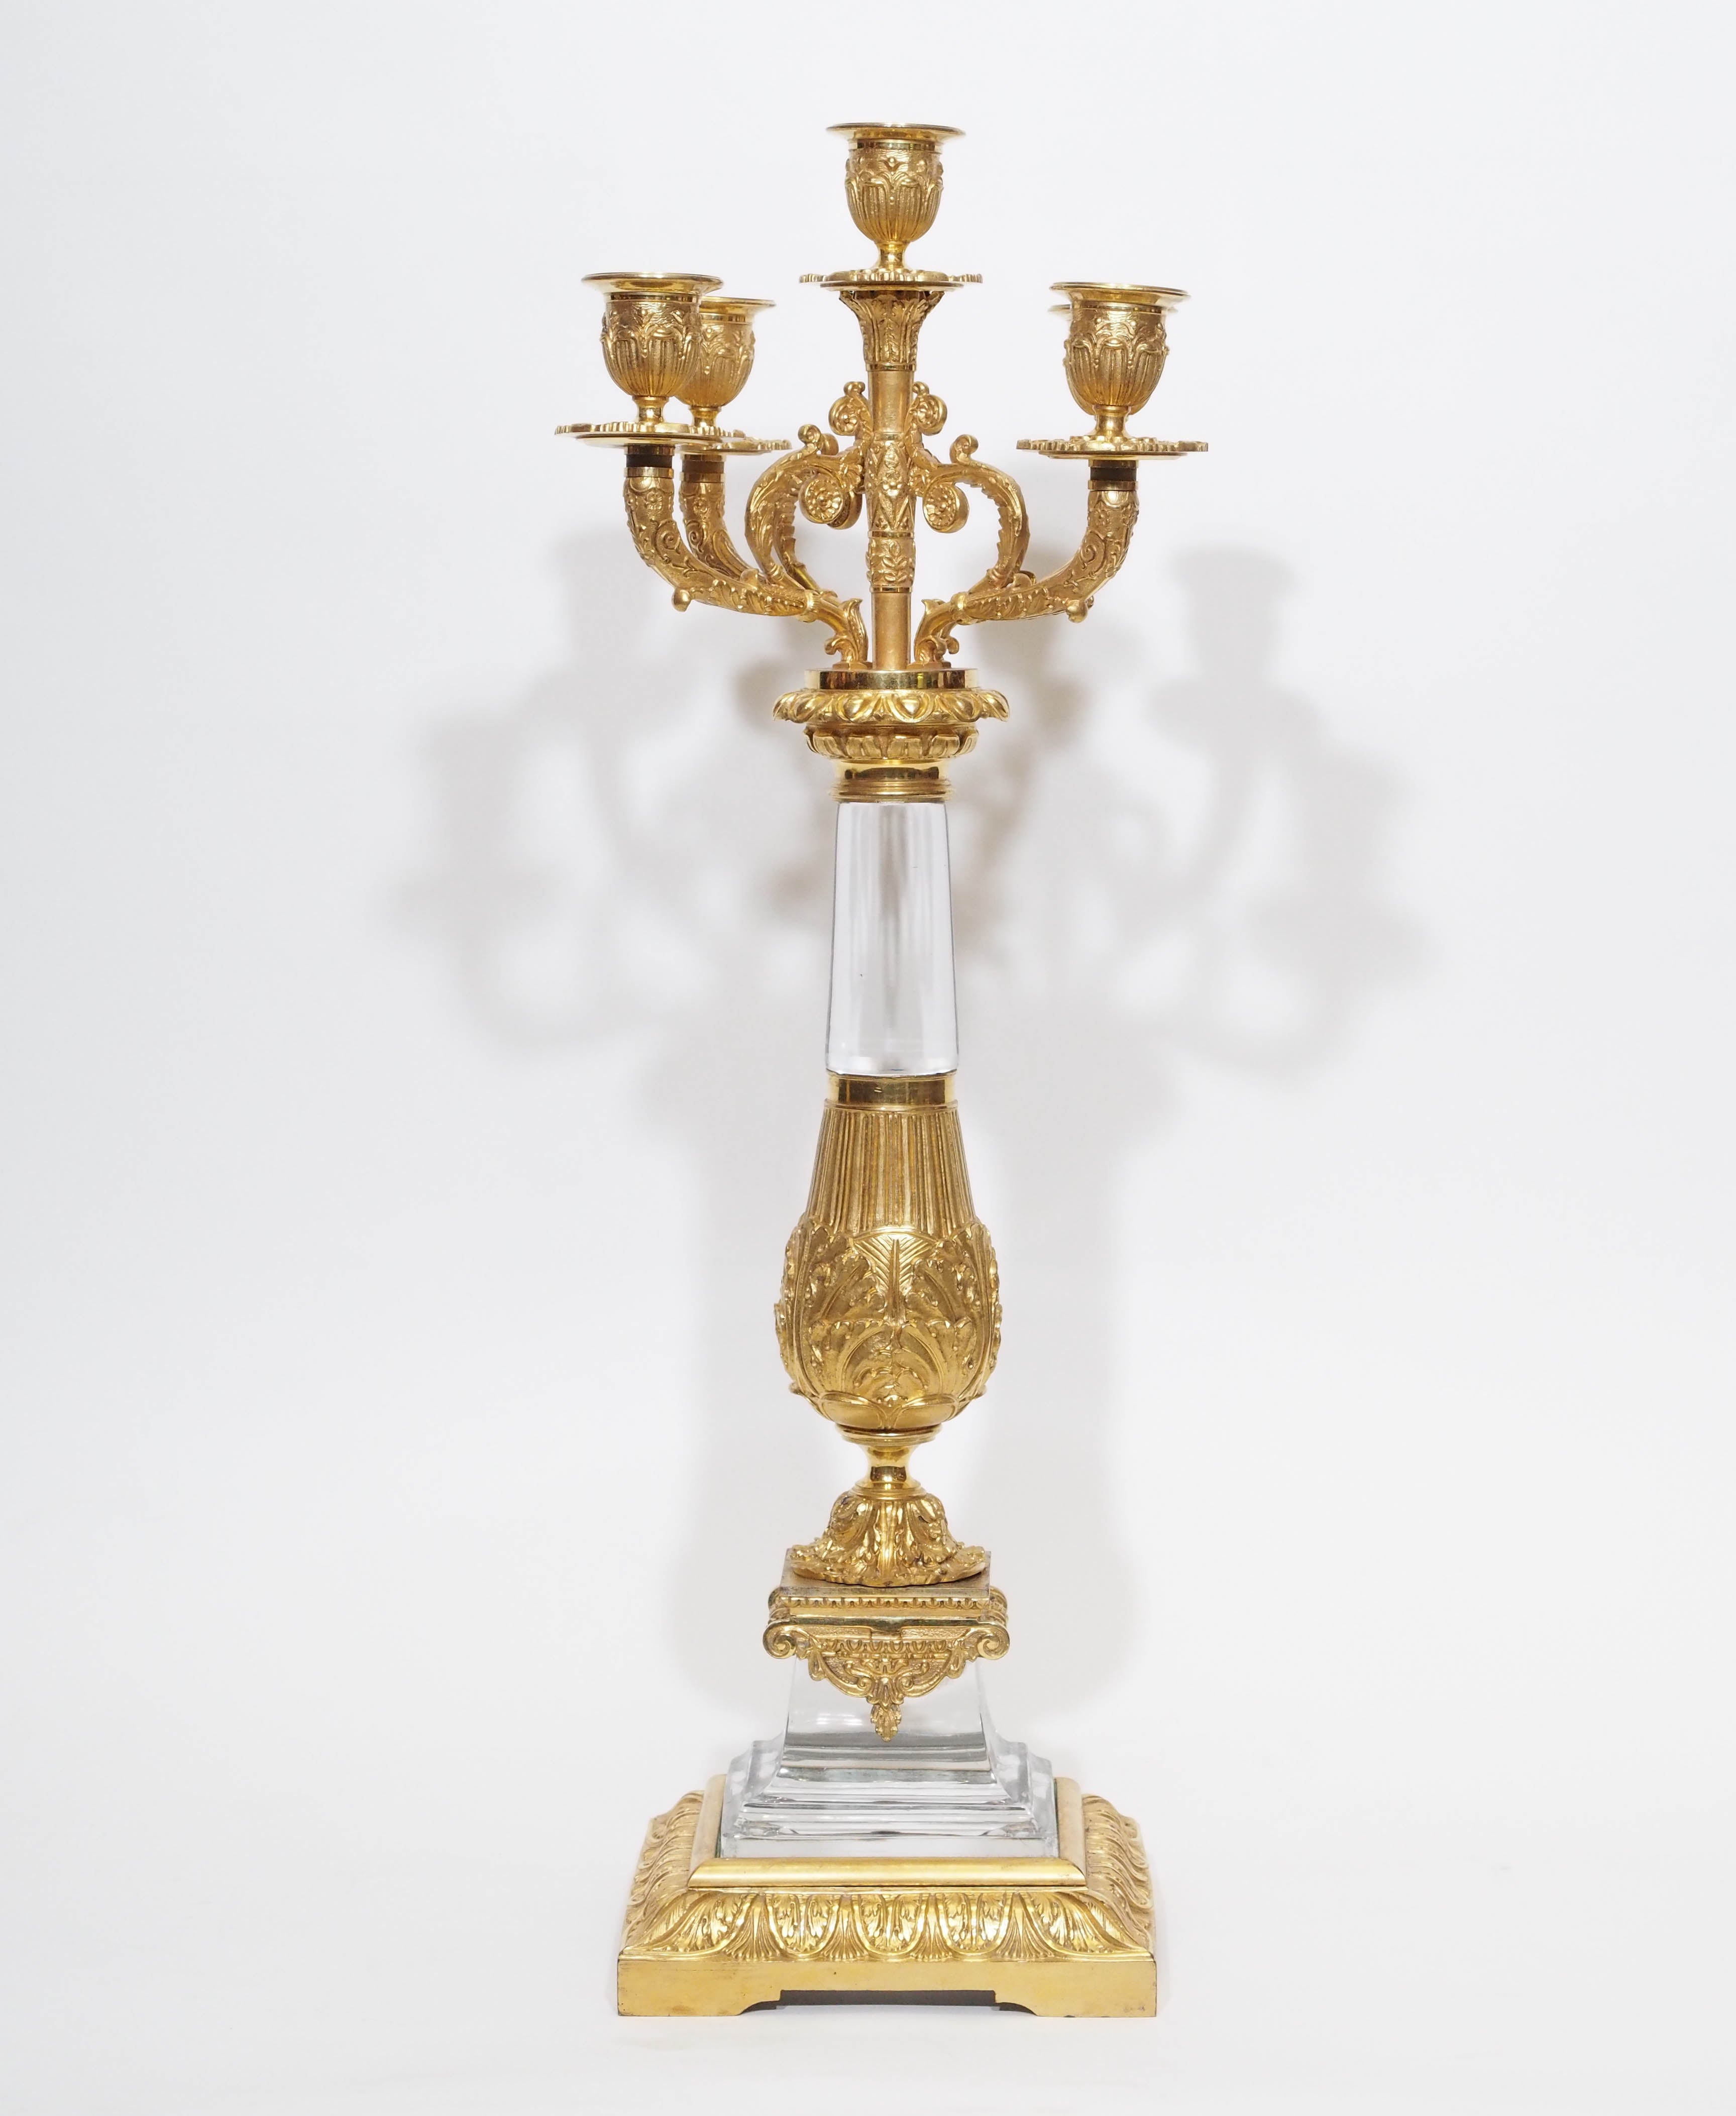 Antique French Napoleon III Baccarat and ormolu candelabra. Magnificent craftsmanship.